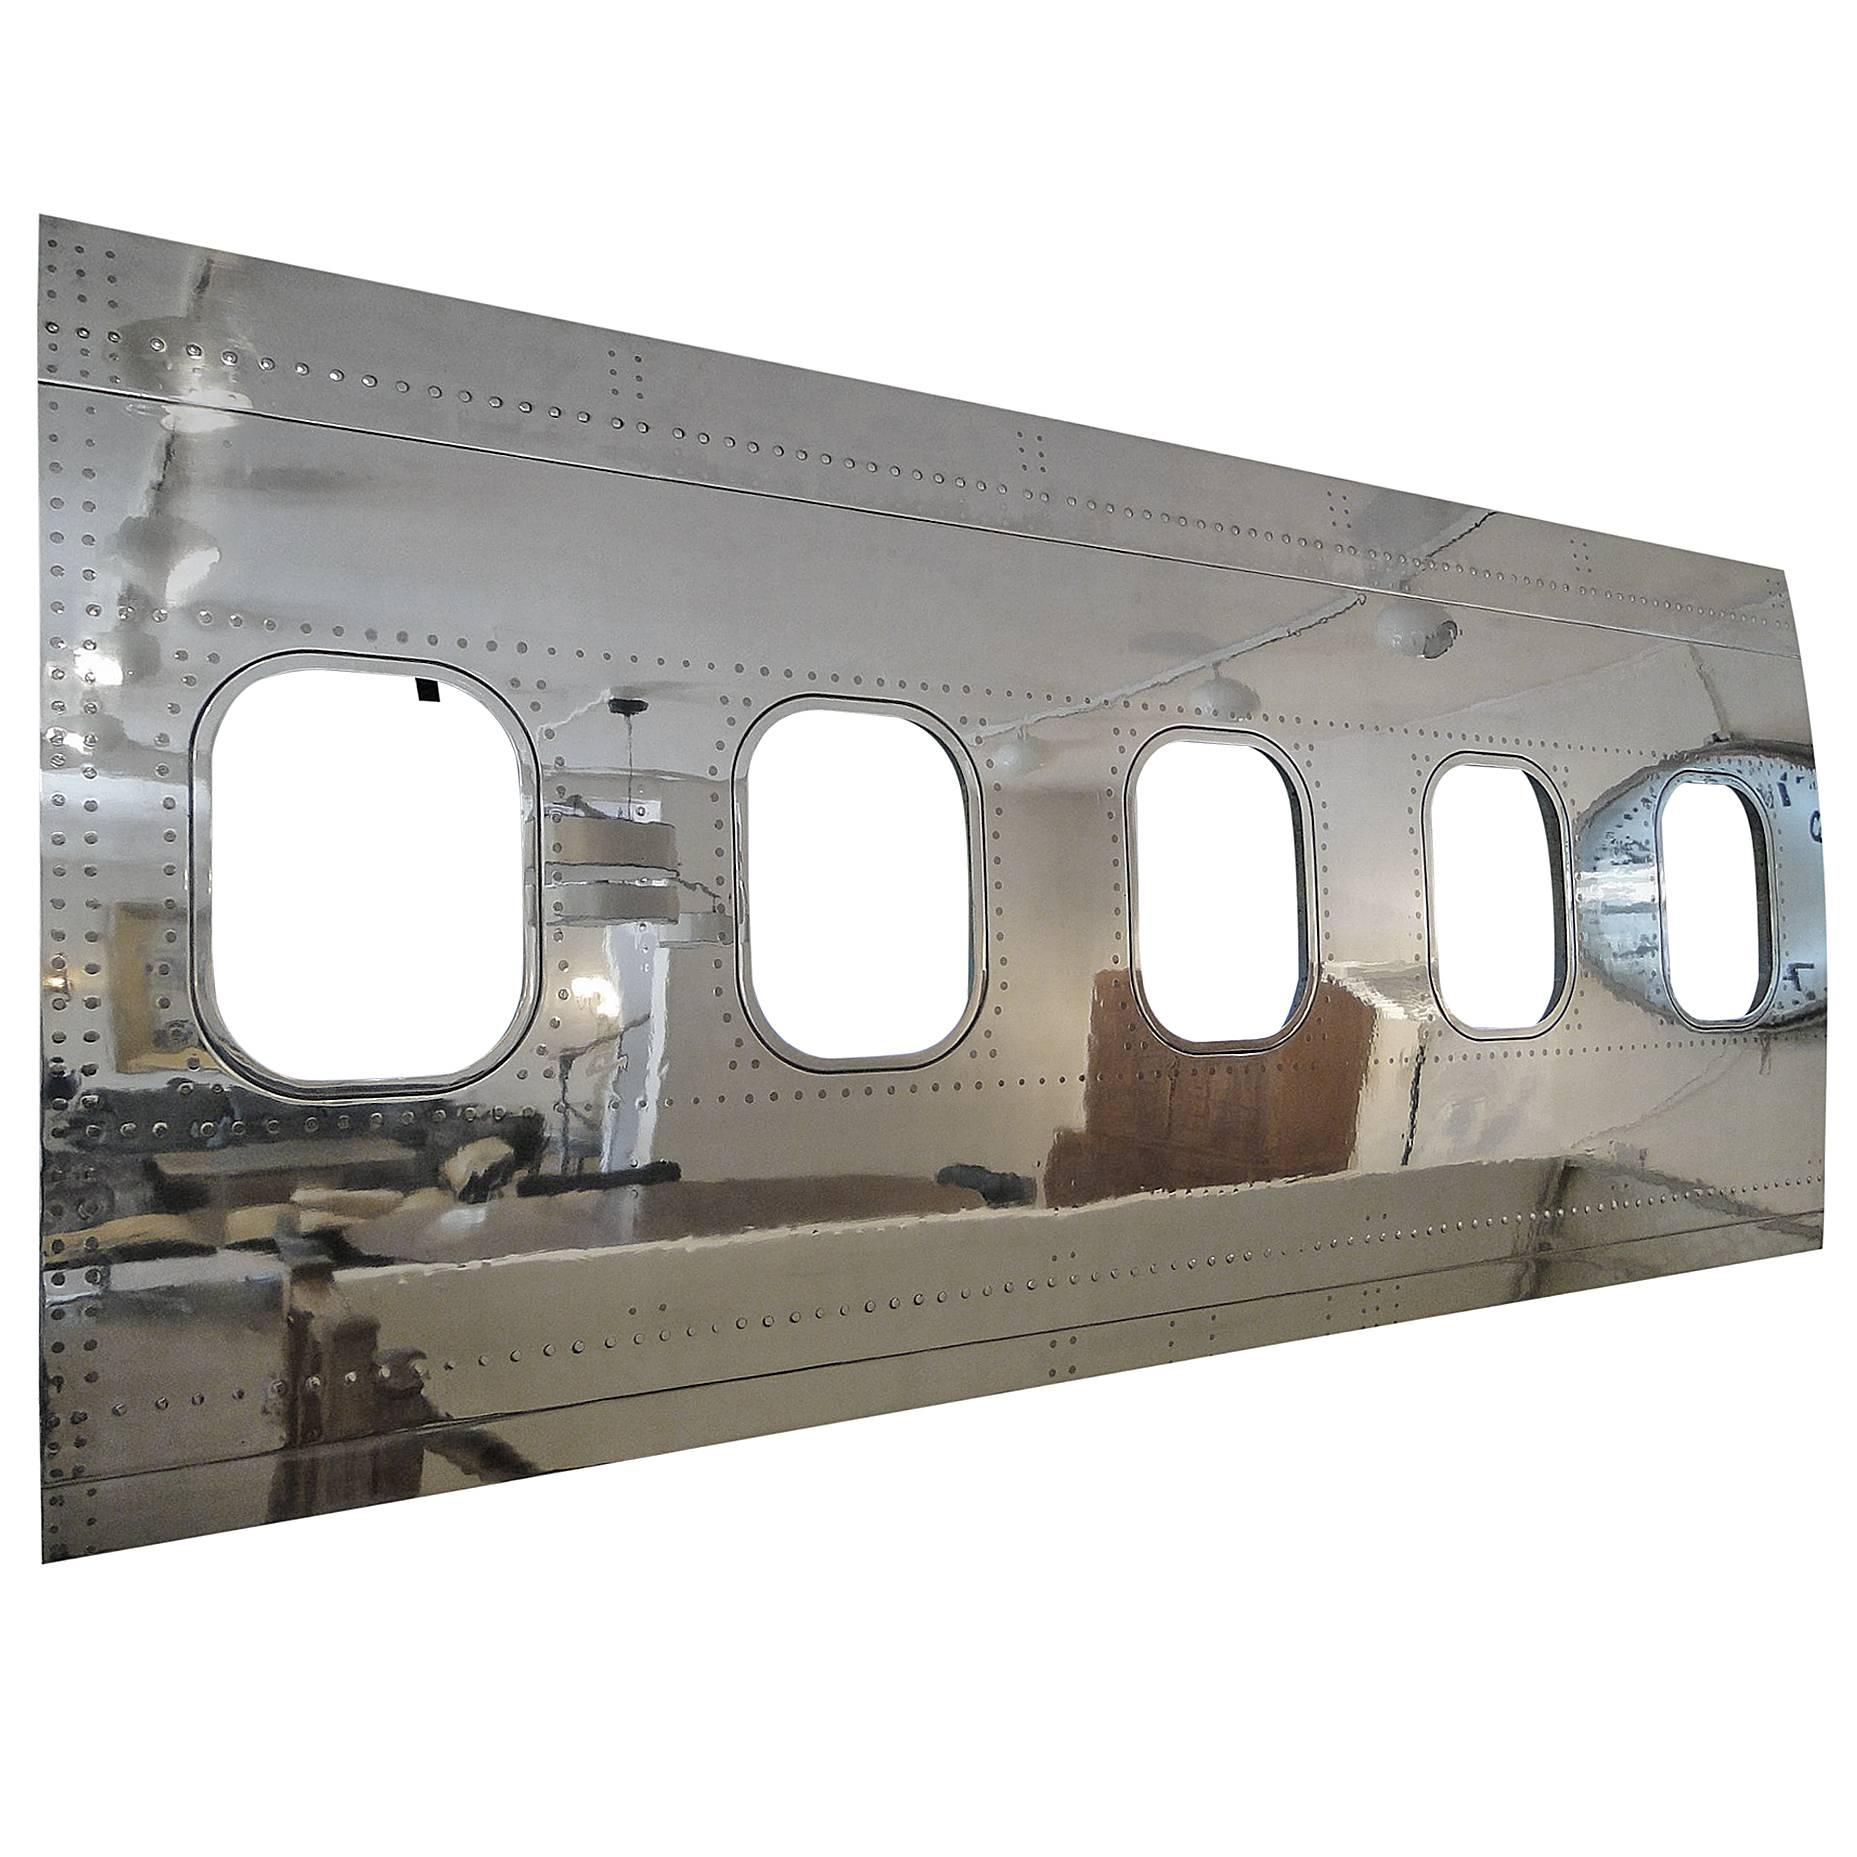 20th Century Wall Panel Boeing 747 Wall Decor Frame Five Windows For Sale